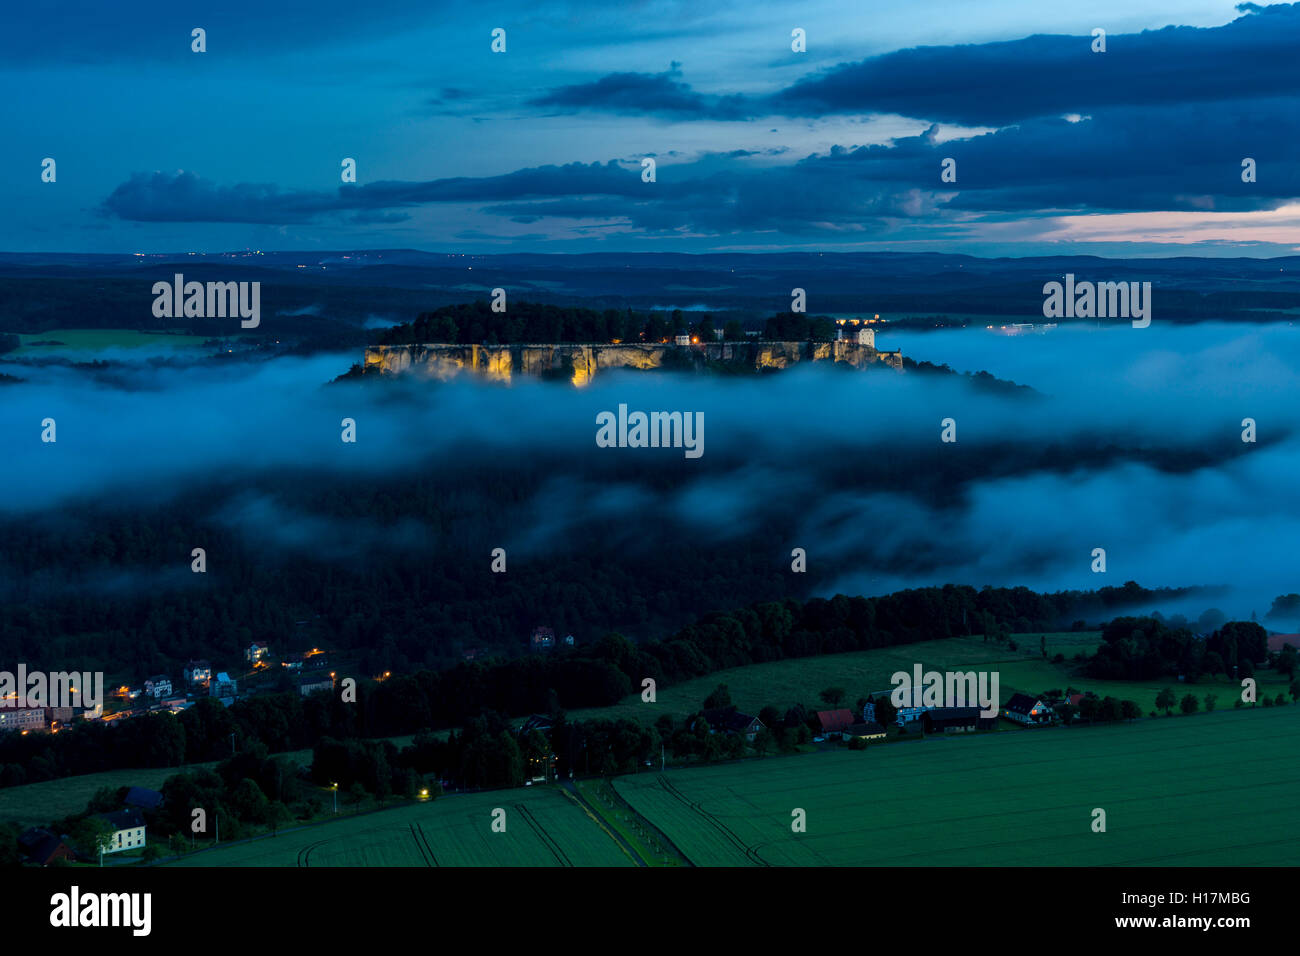 The illuminated fortress Festung Königstein, surrounded by clouds, seen from Lilienstein at night, Königstein, Saxony, Germany Stock Photo